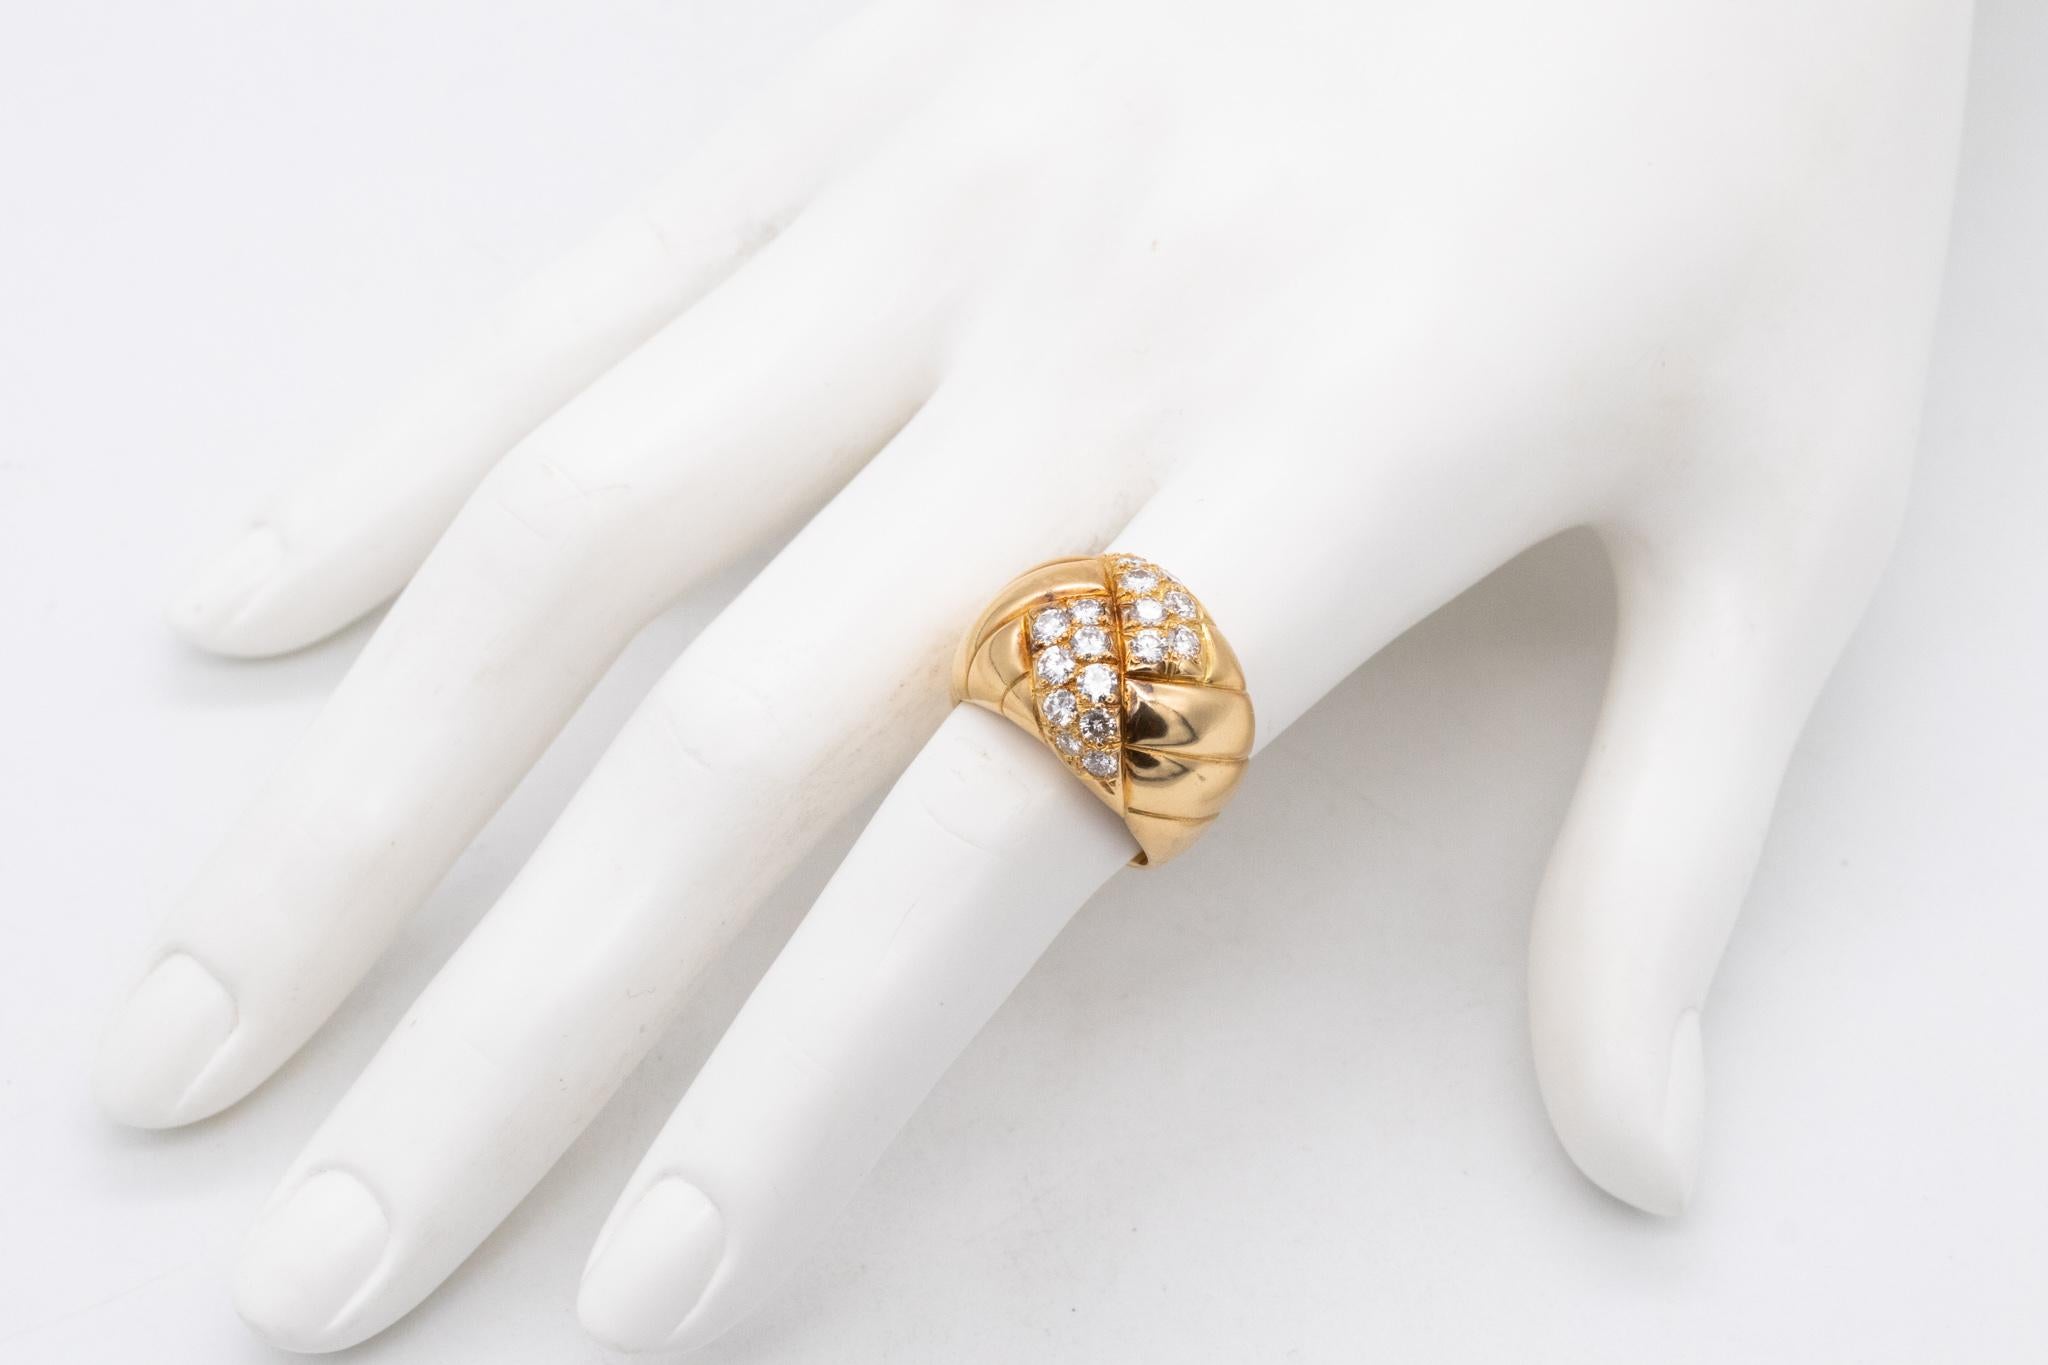 Bombe cocktail ring designed by Van Cleef & Arpels.

A vintage piece made in Paris France by the house of Van Cleef & Arpels, back in the late 1970's. It was crafted in solid yellow gold of 18 karats, with high polished finish,

Mounted, with an